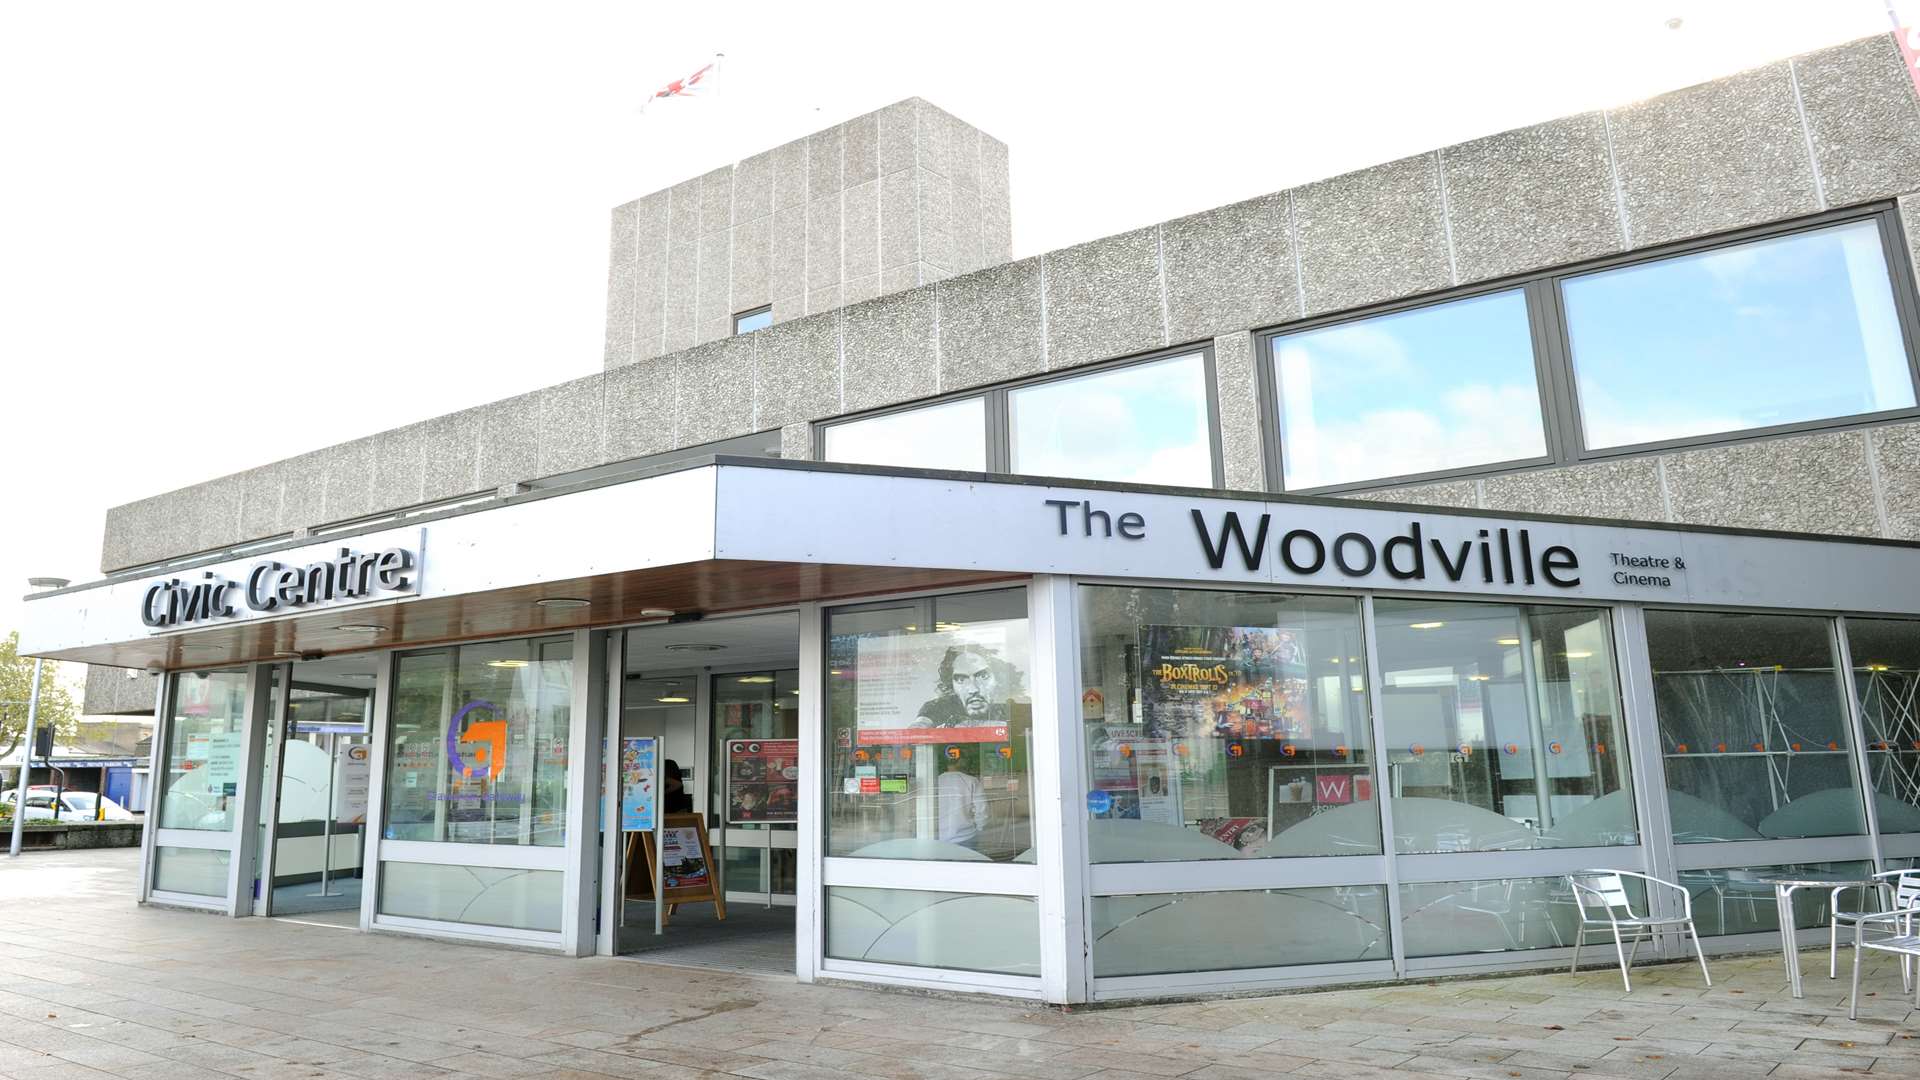 The Woodville, based in the Civic Centre in Gravesend